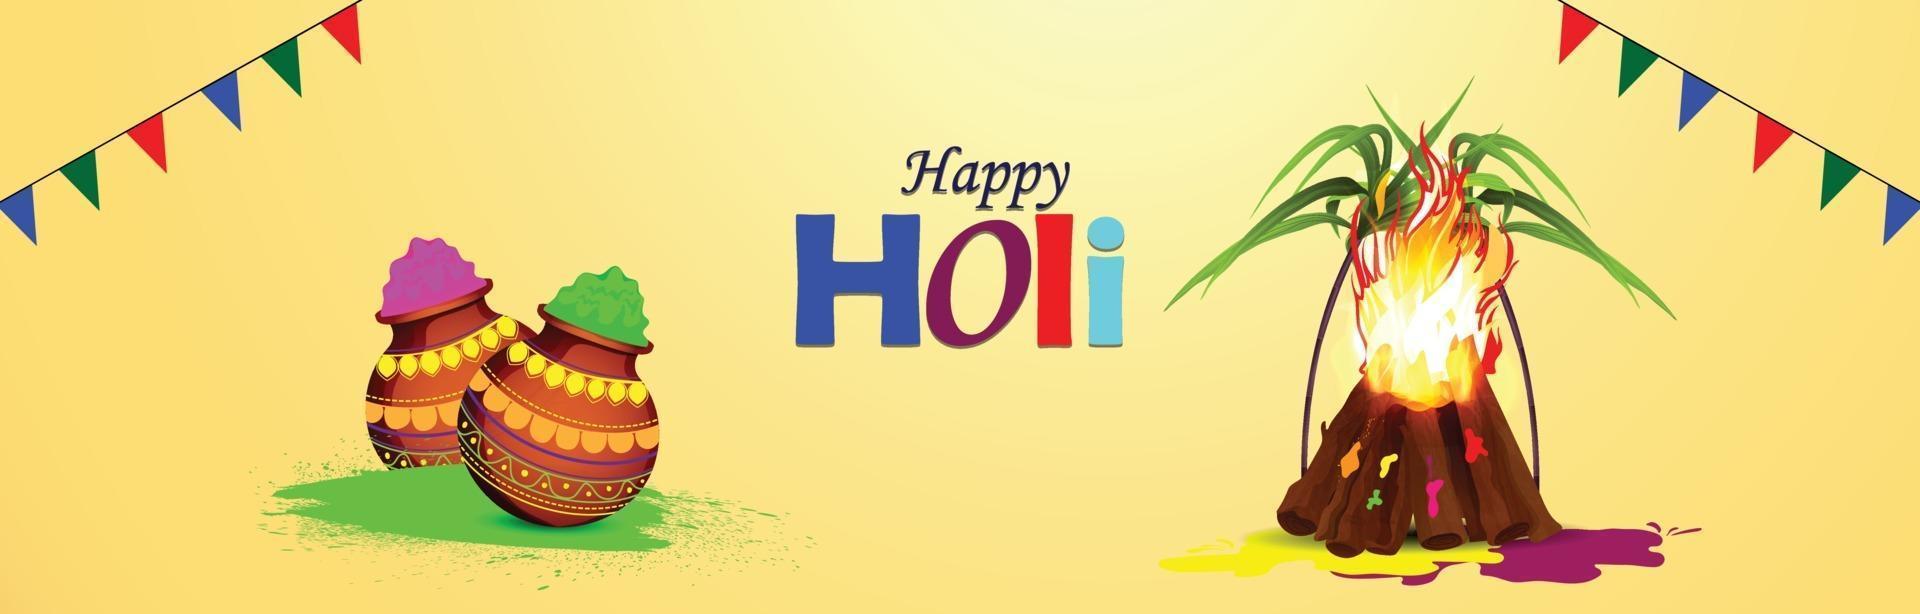 Happy holi banner or background vector